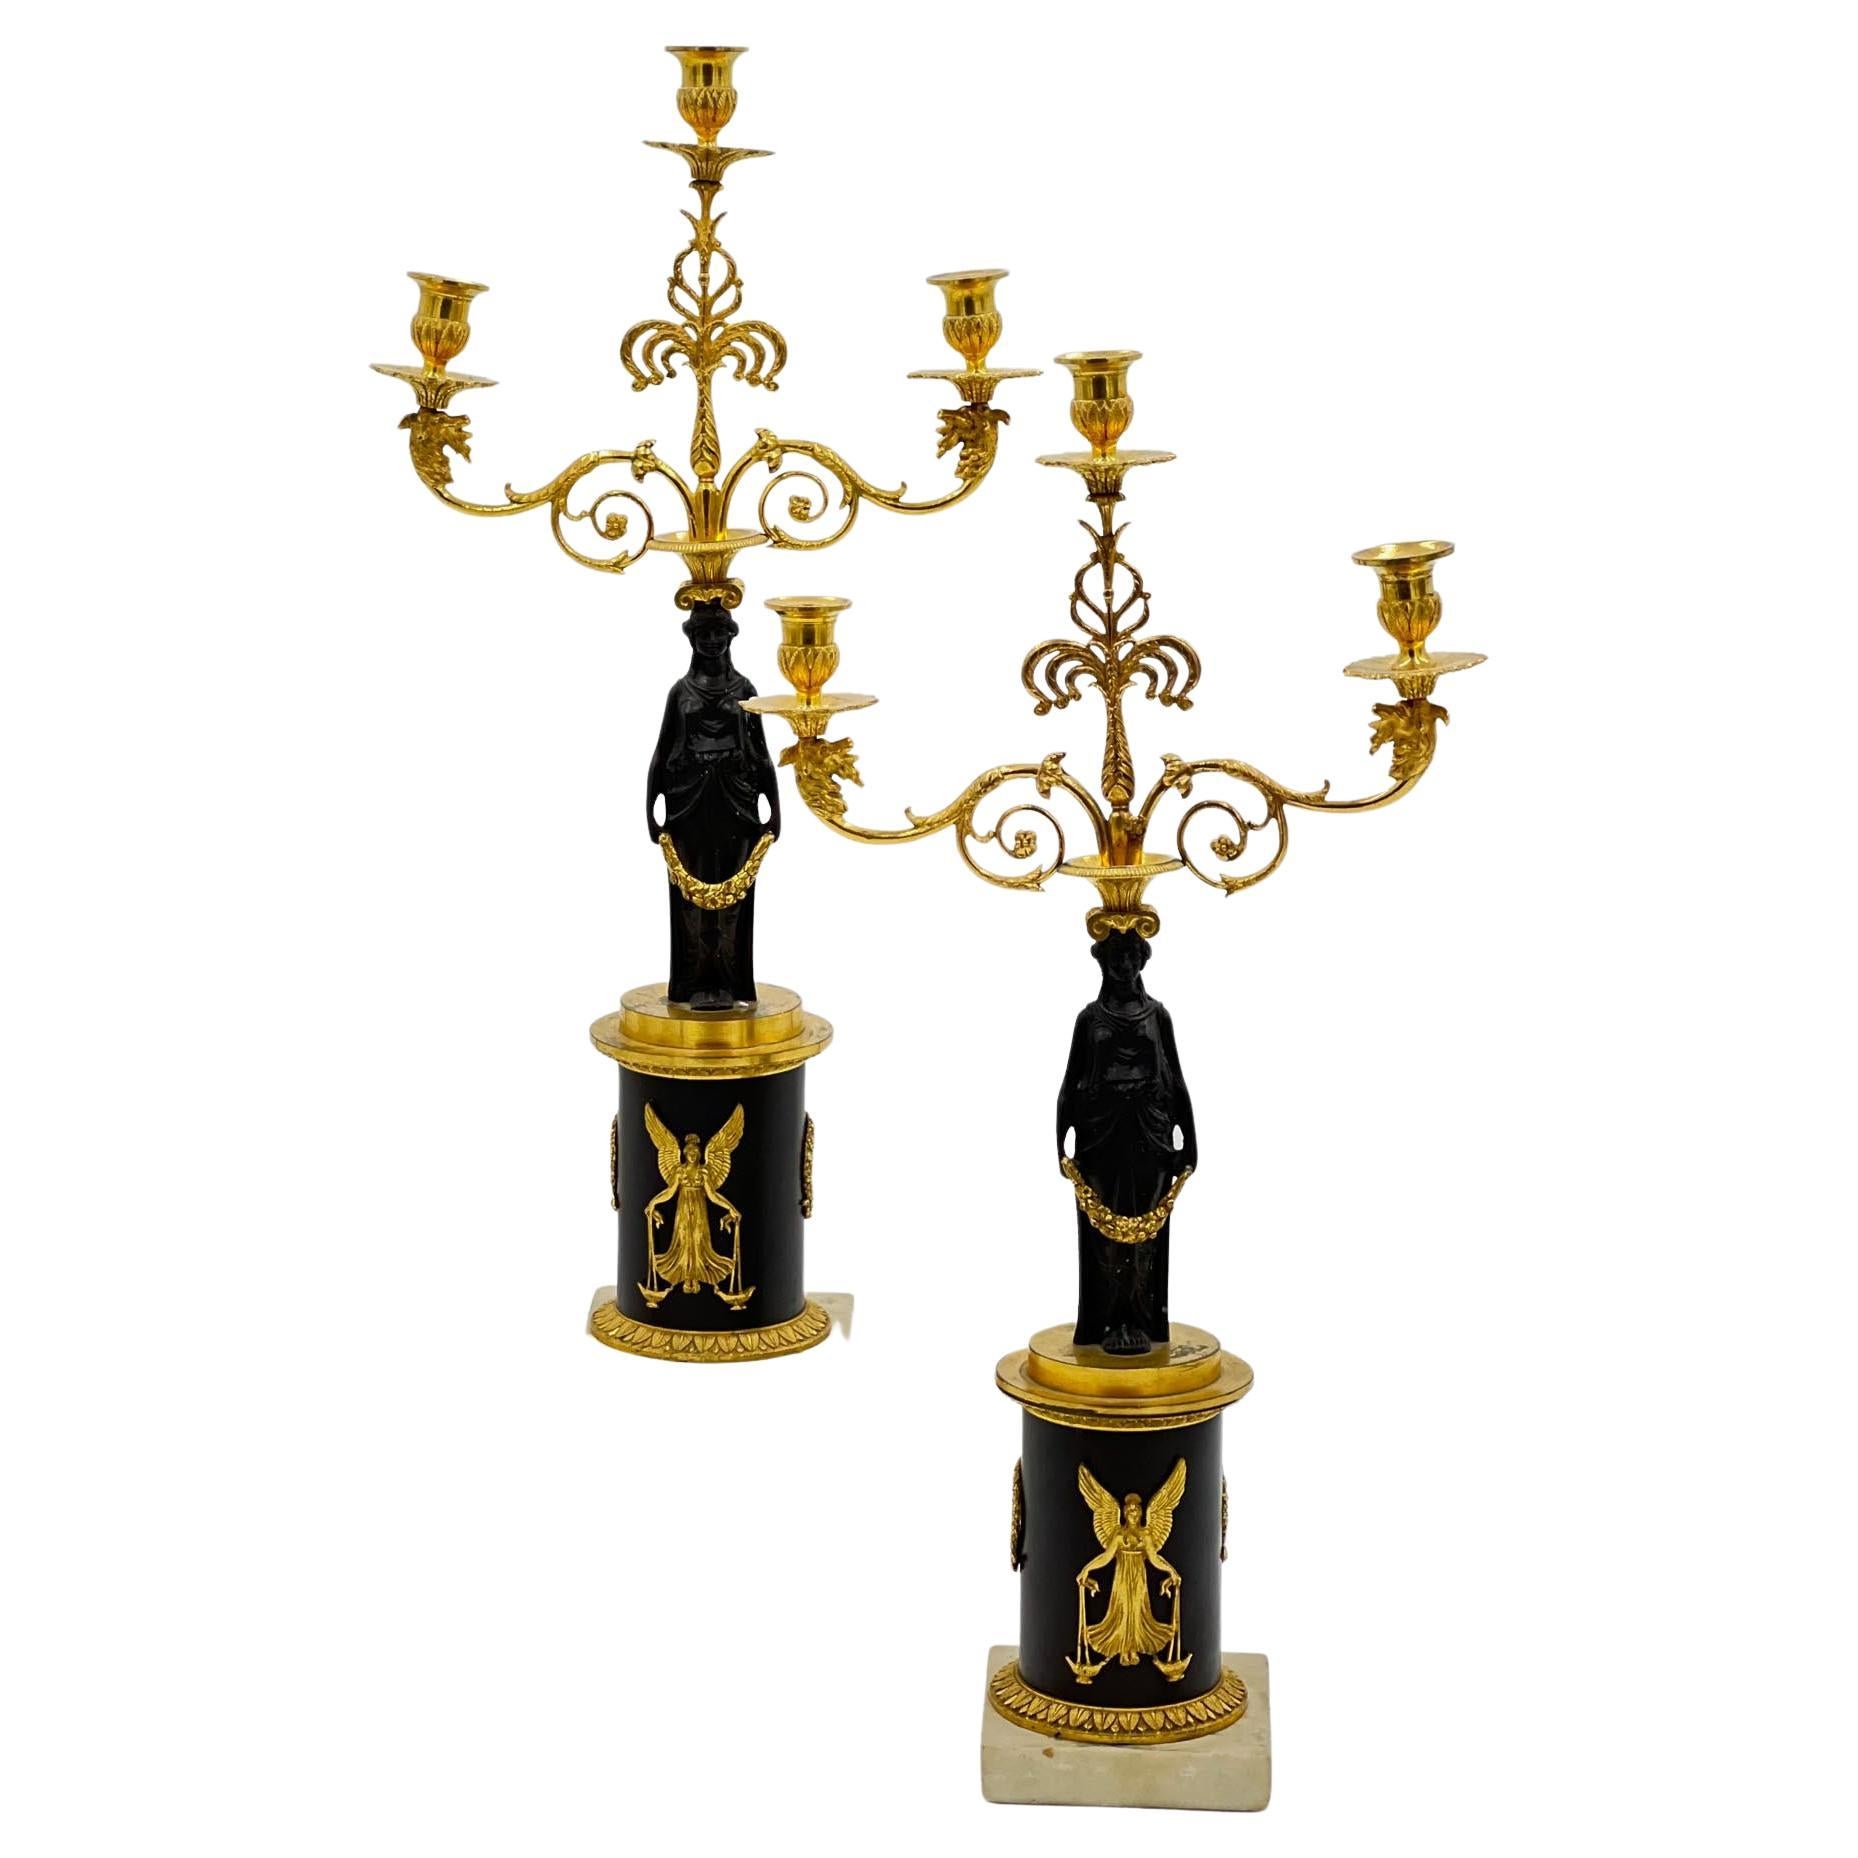 Pair of Antique 19th Century English Regency Candelabra For Sale